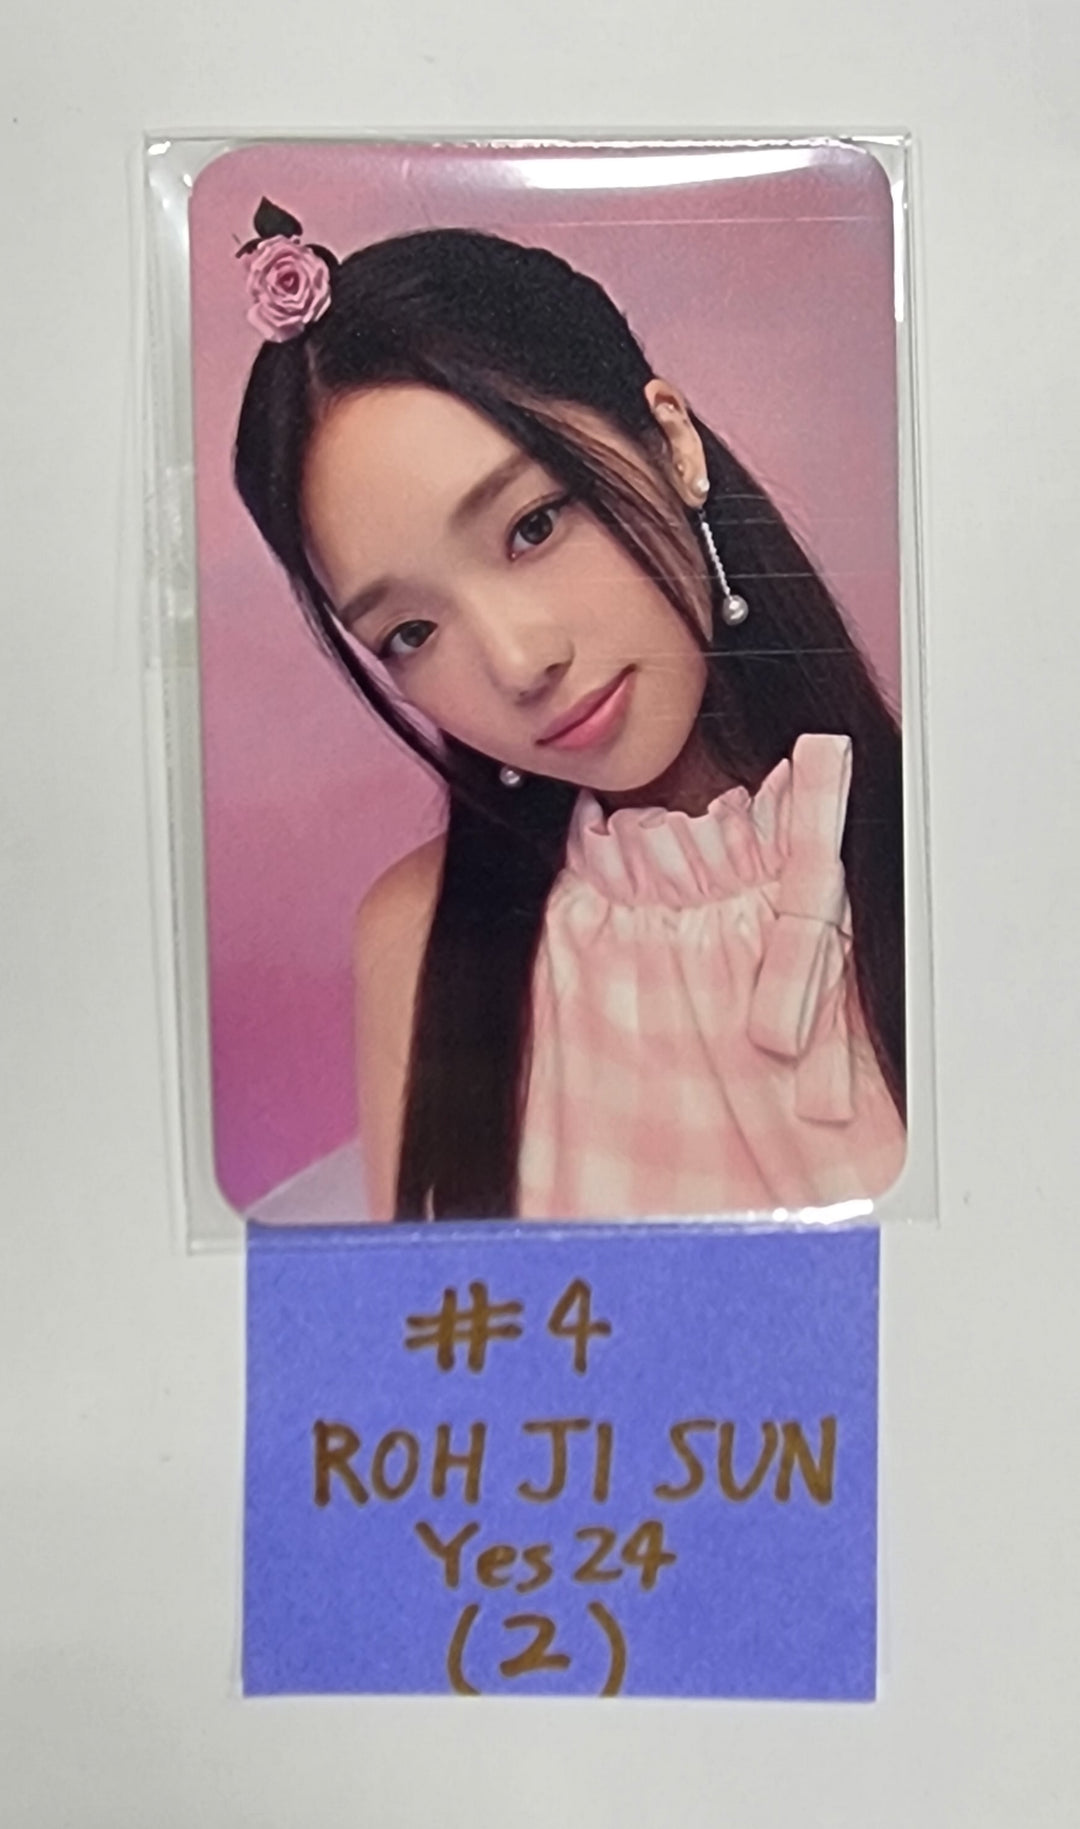 Fromis_9 "Unlock My World" - Yes24 Fansign Event Photocard